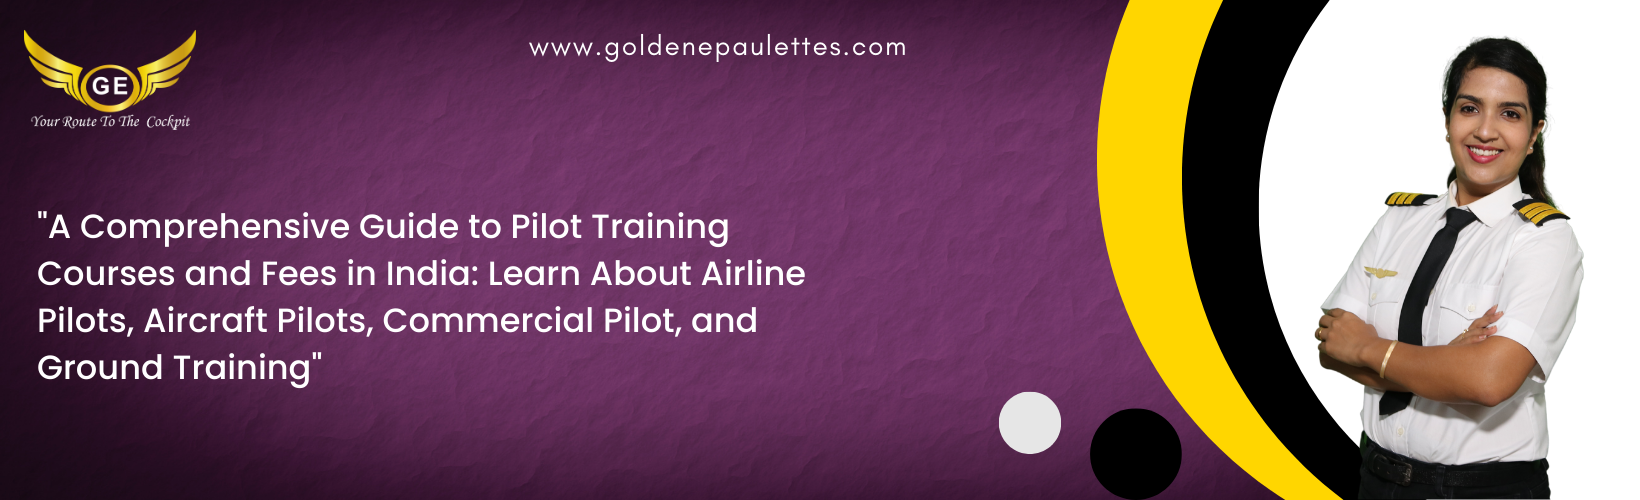 An Overview of Pilot Training Courses and Fees in India